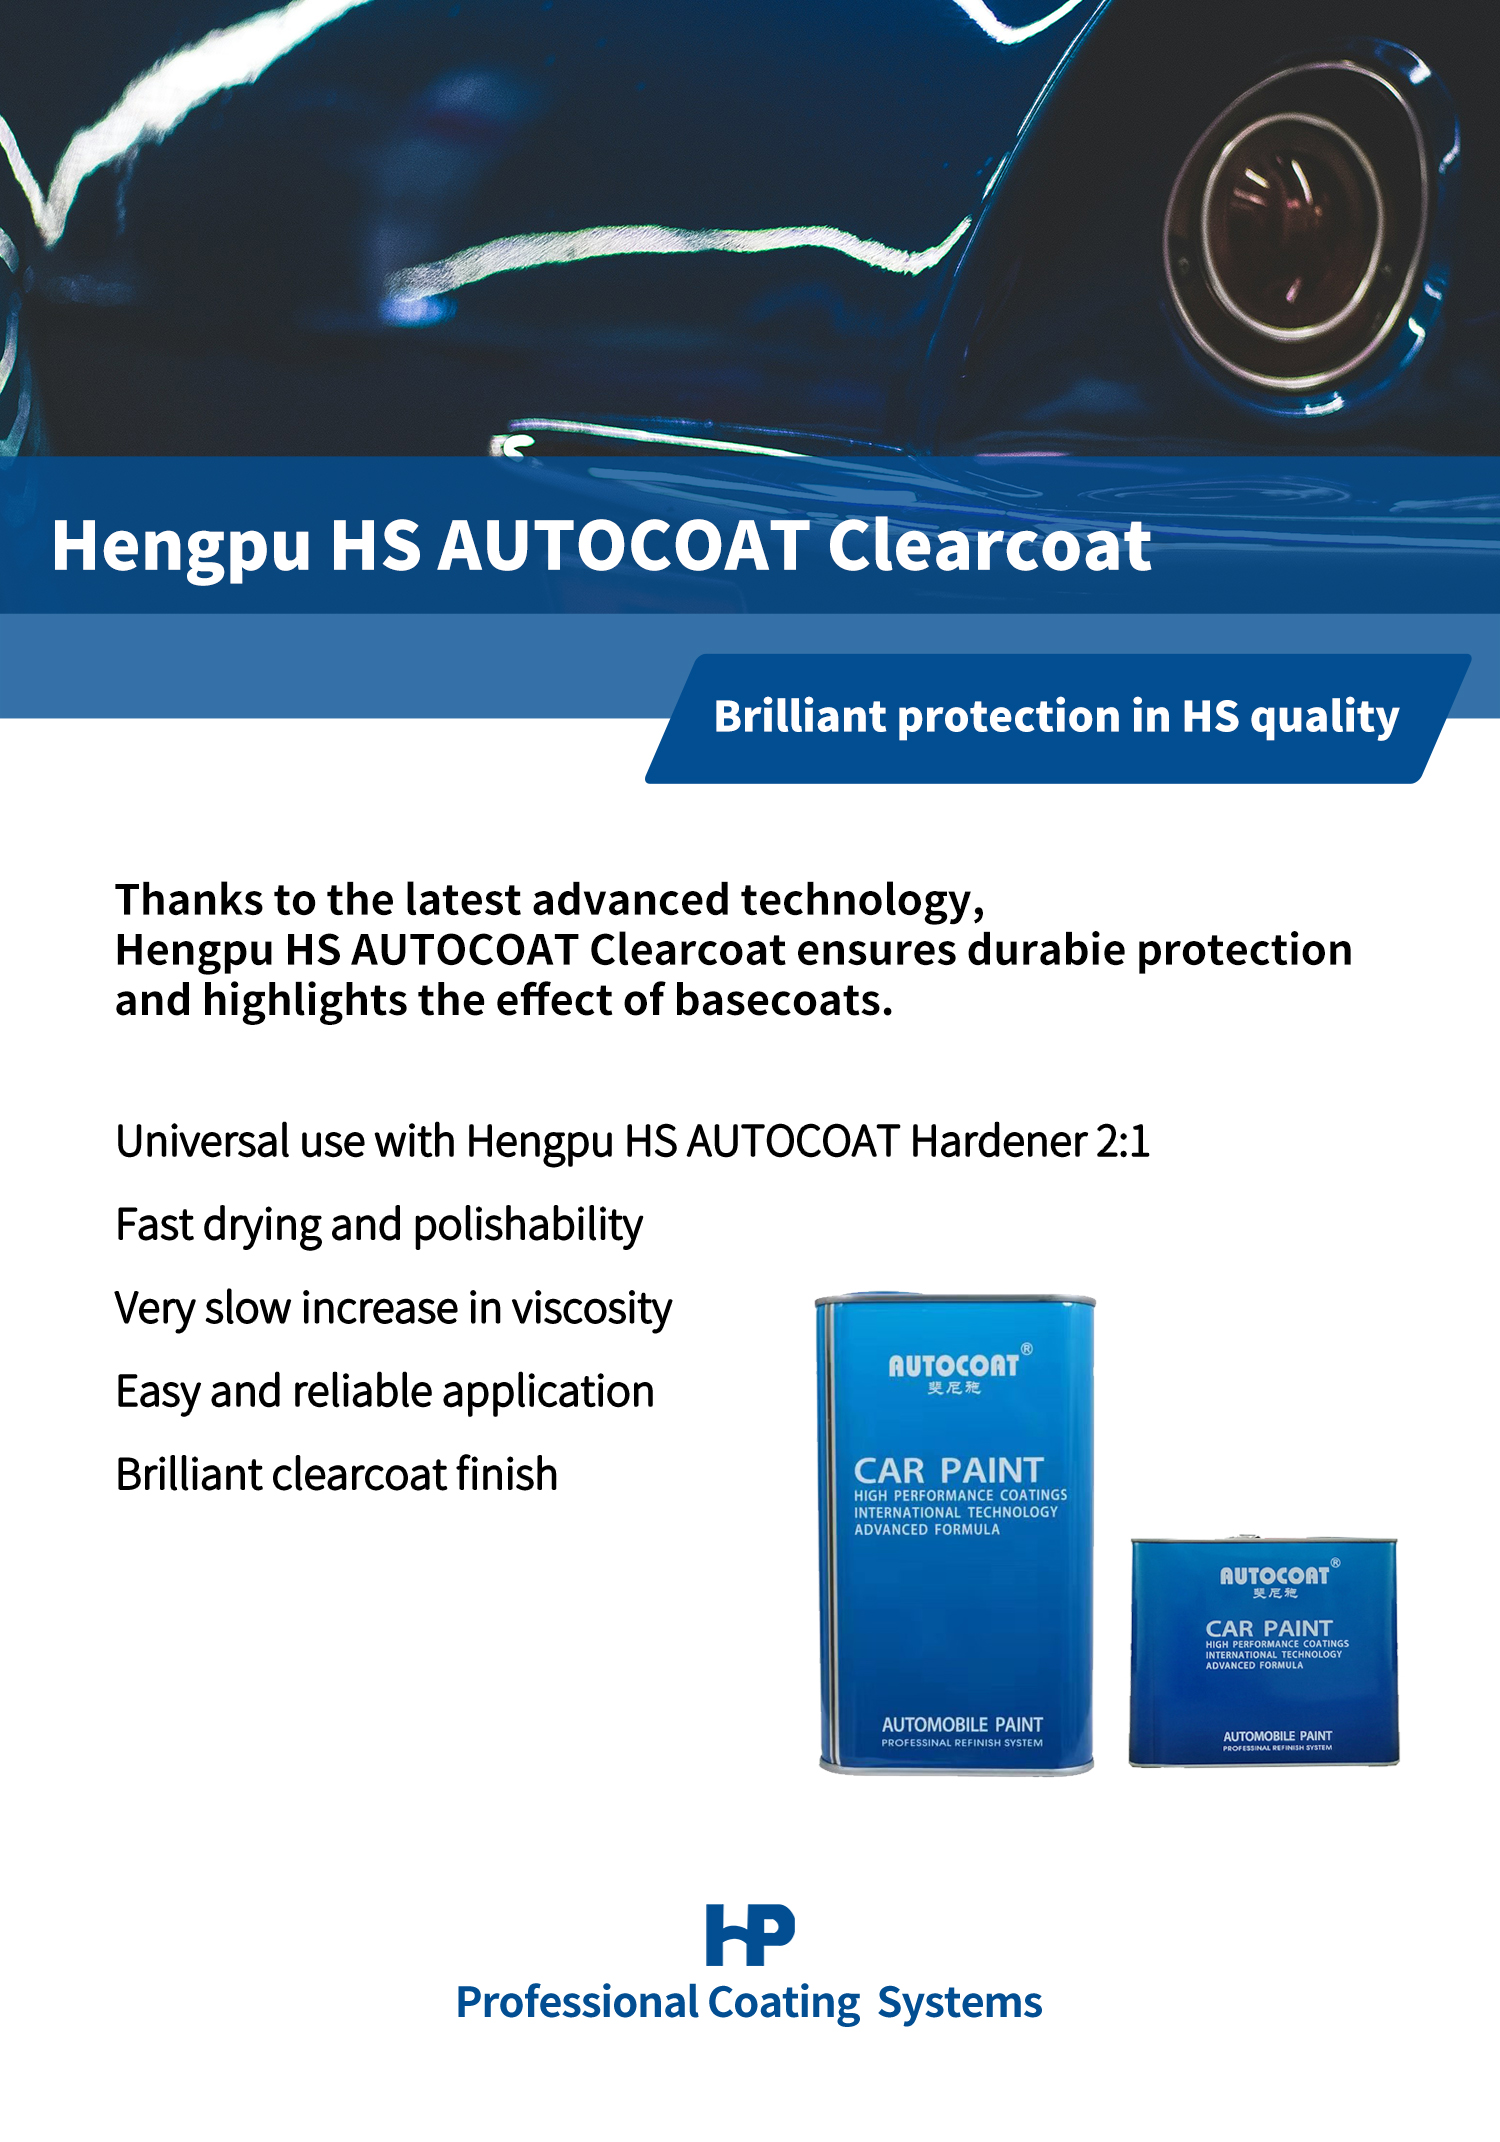 High Application High Gloss Auto Paint Easy Operation High Plumpness Car Paint Glinter HS Highlighting Clearcoat